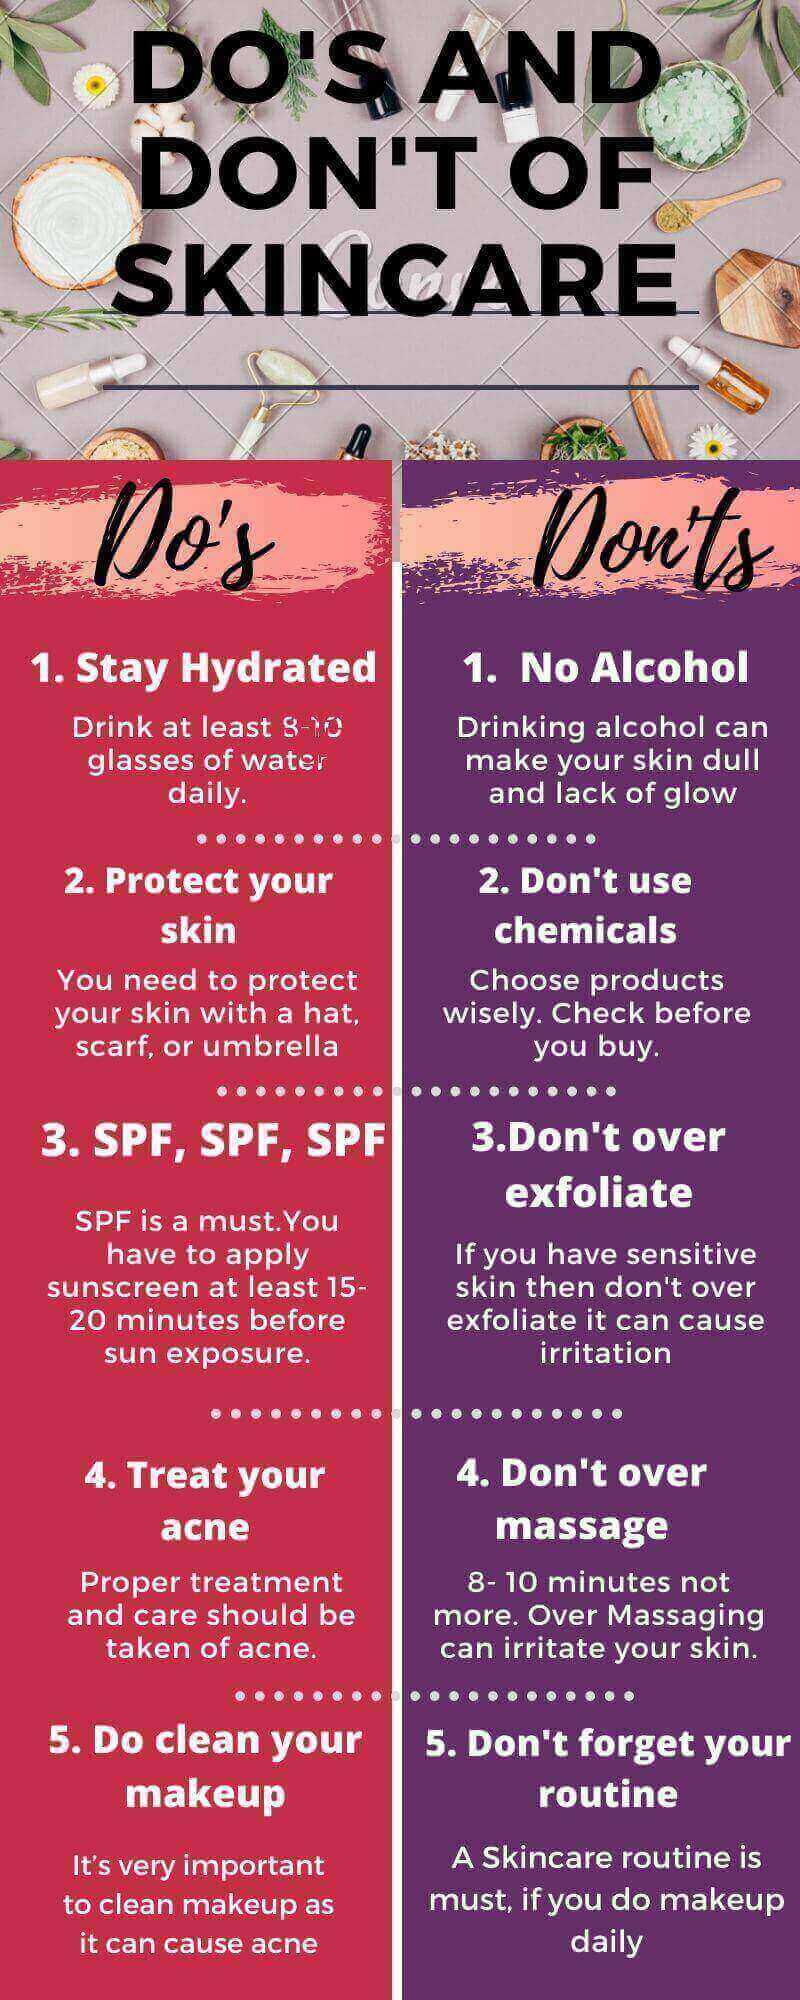 Do's and Don'ts of skincare 